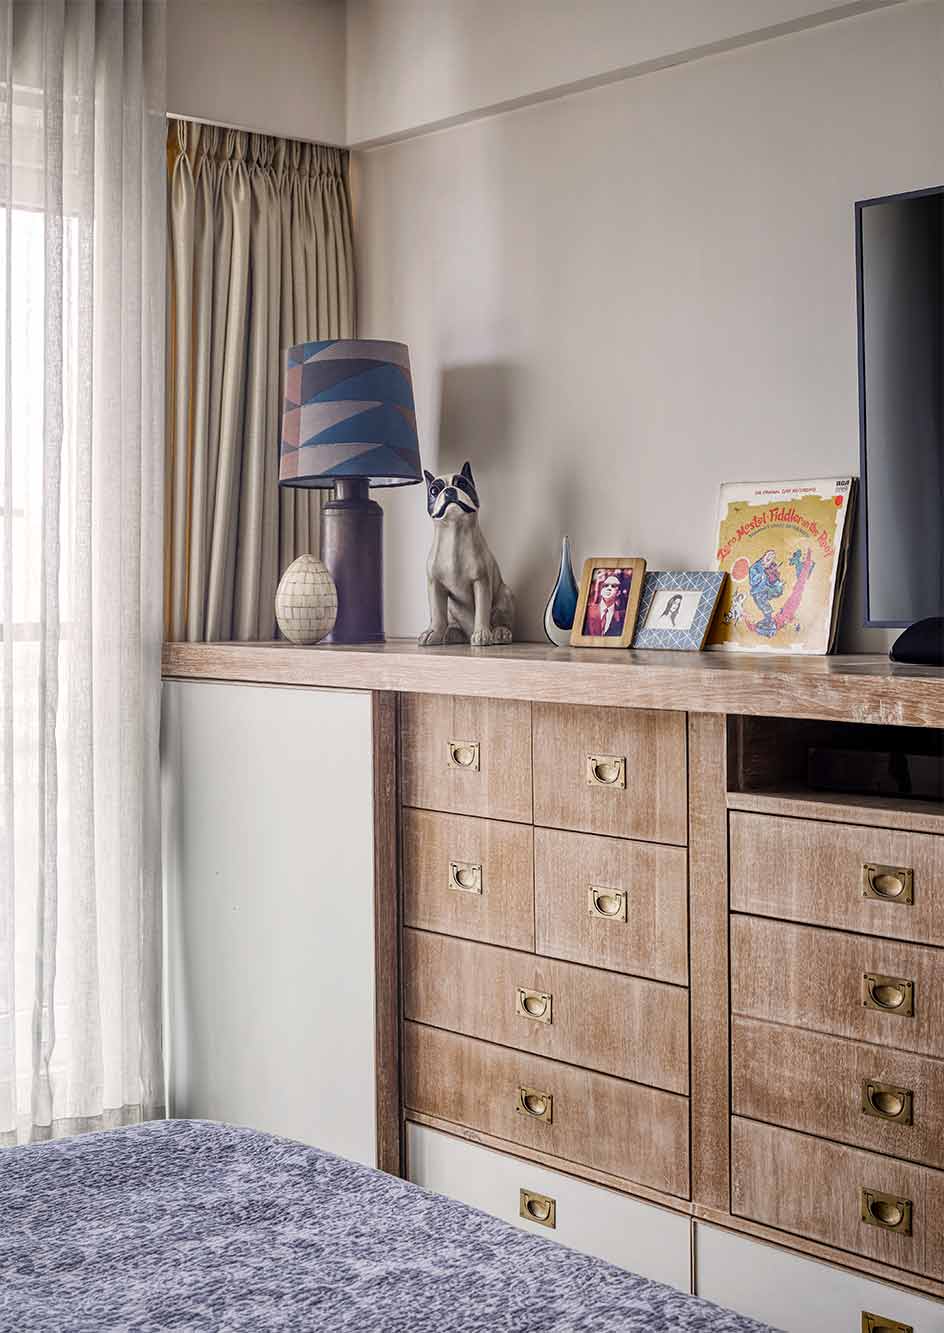 Clutter-free Chest Of Drawers That Also Serve As A Wardrobe - Beautiful Homes